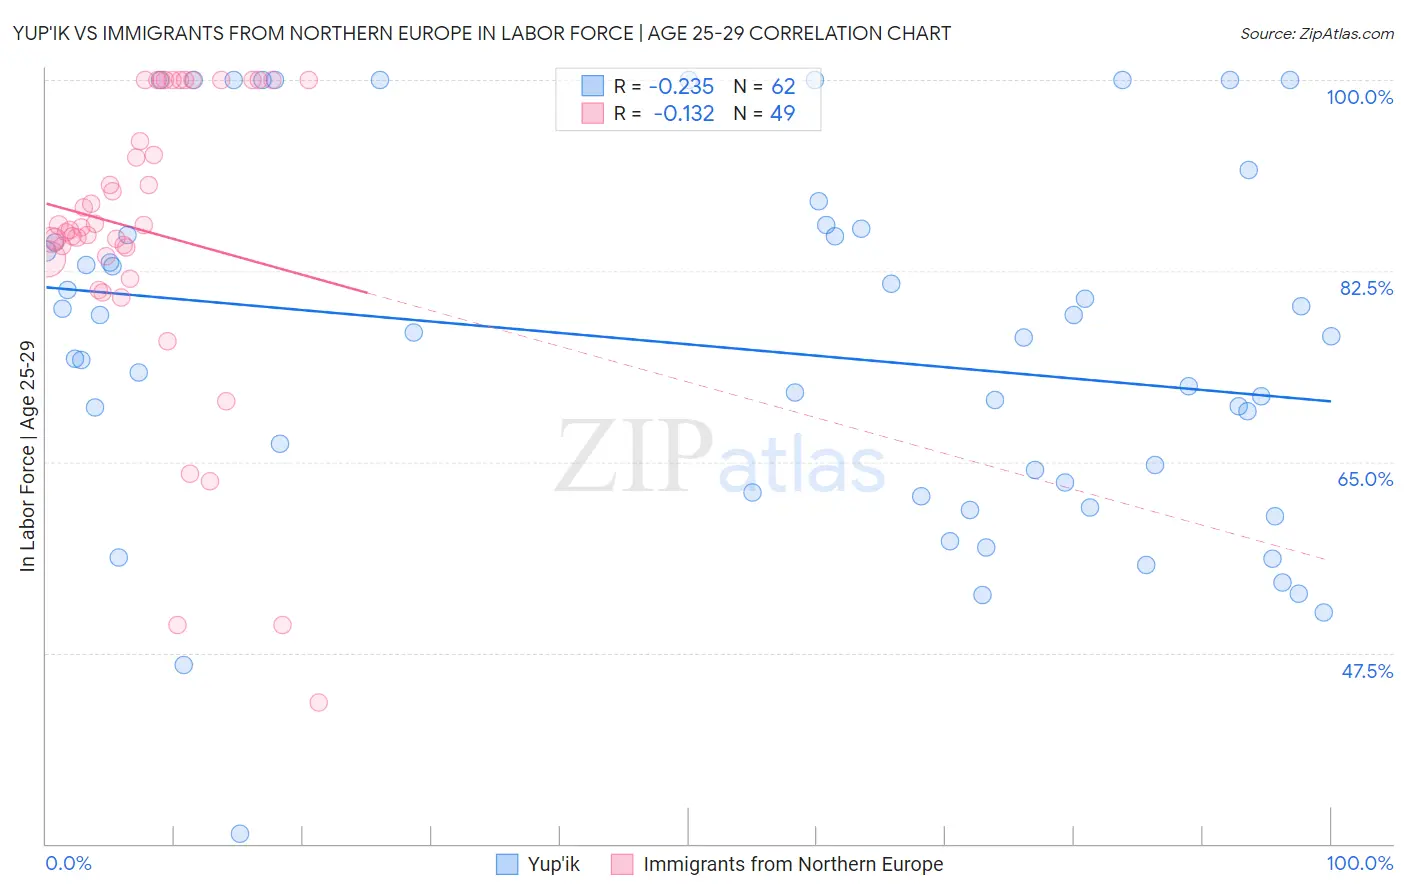 Yup'ik vs Immigrants from Northern Europe In Labor Force | Age 25-29